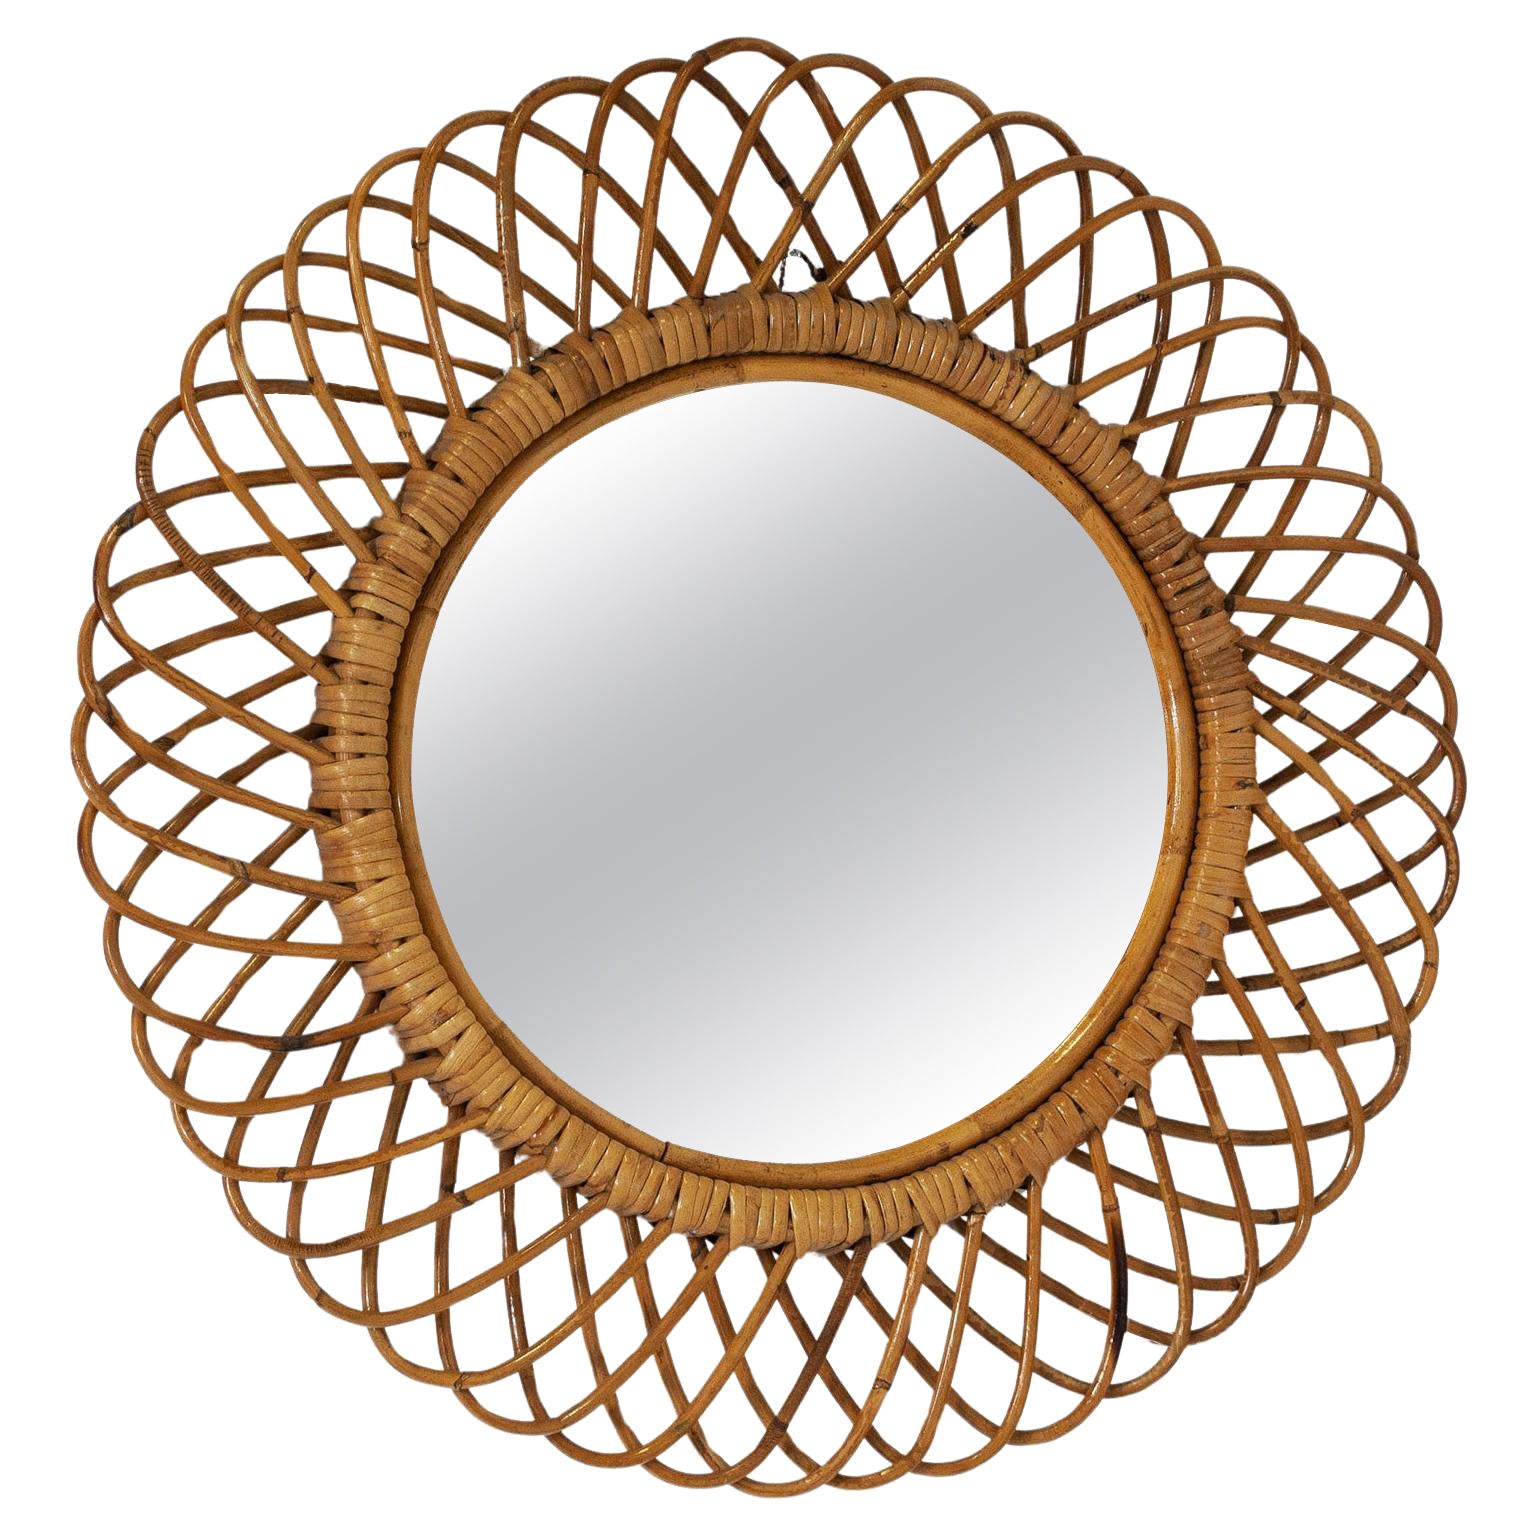 Italian Round mirror with woven wicker (india cane) frame. For Sale